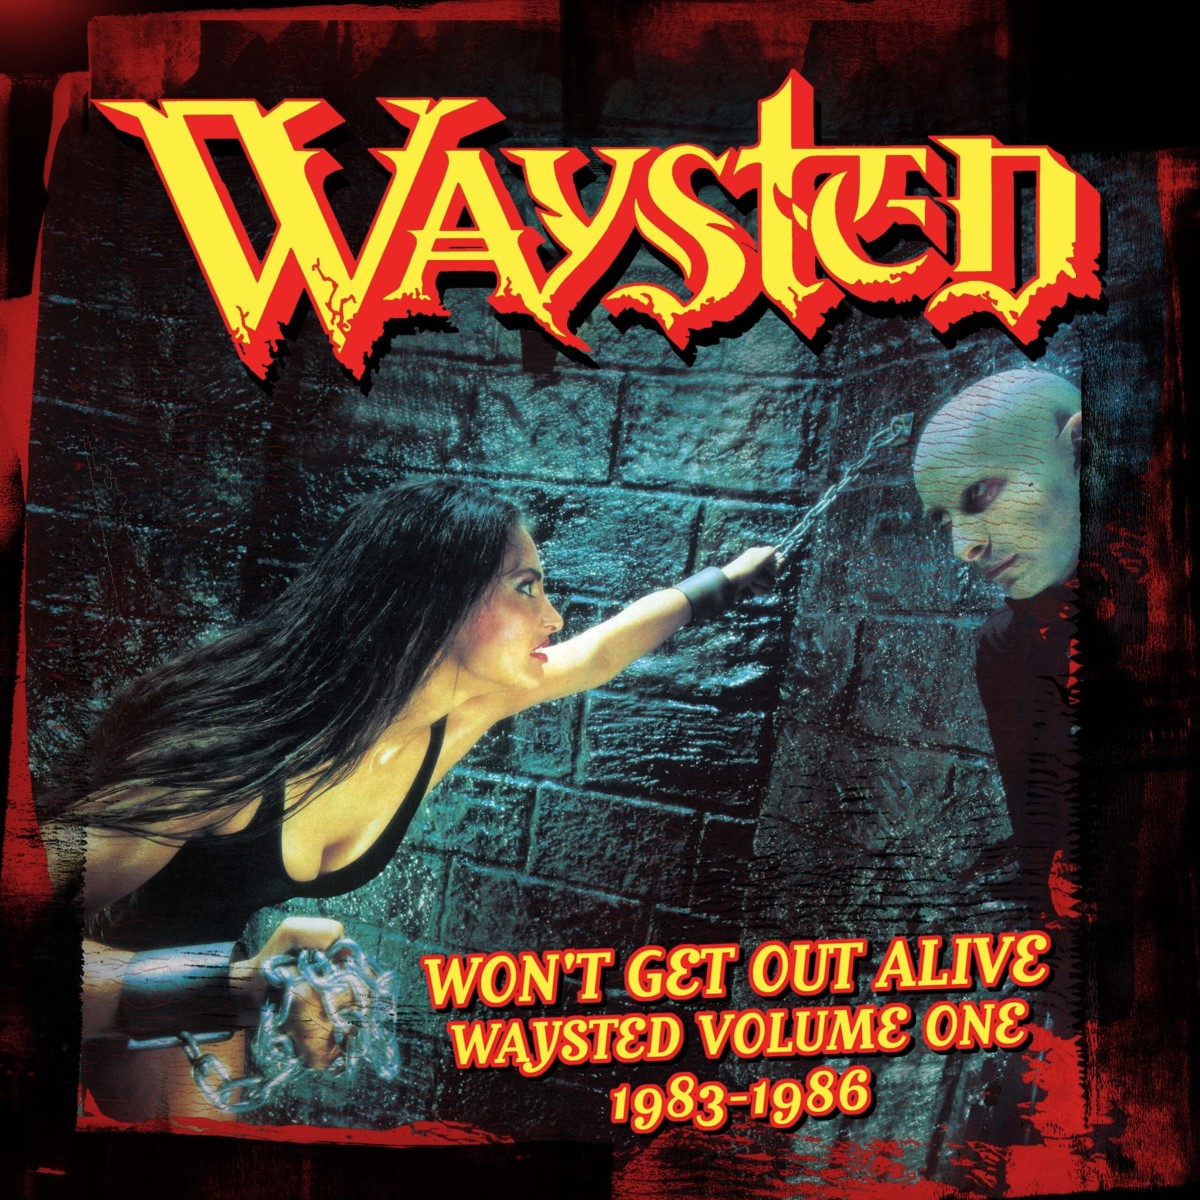 Waysted's Won’t Get Out Alive - Volume One (1983-1986) 4 CD Set Gets Released